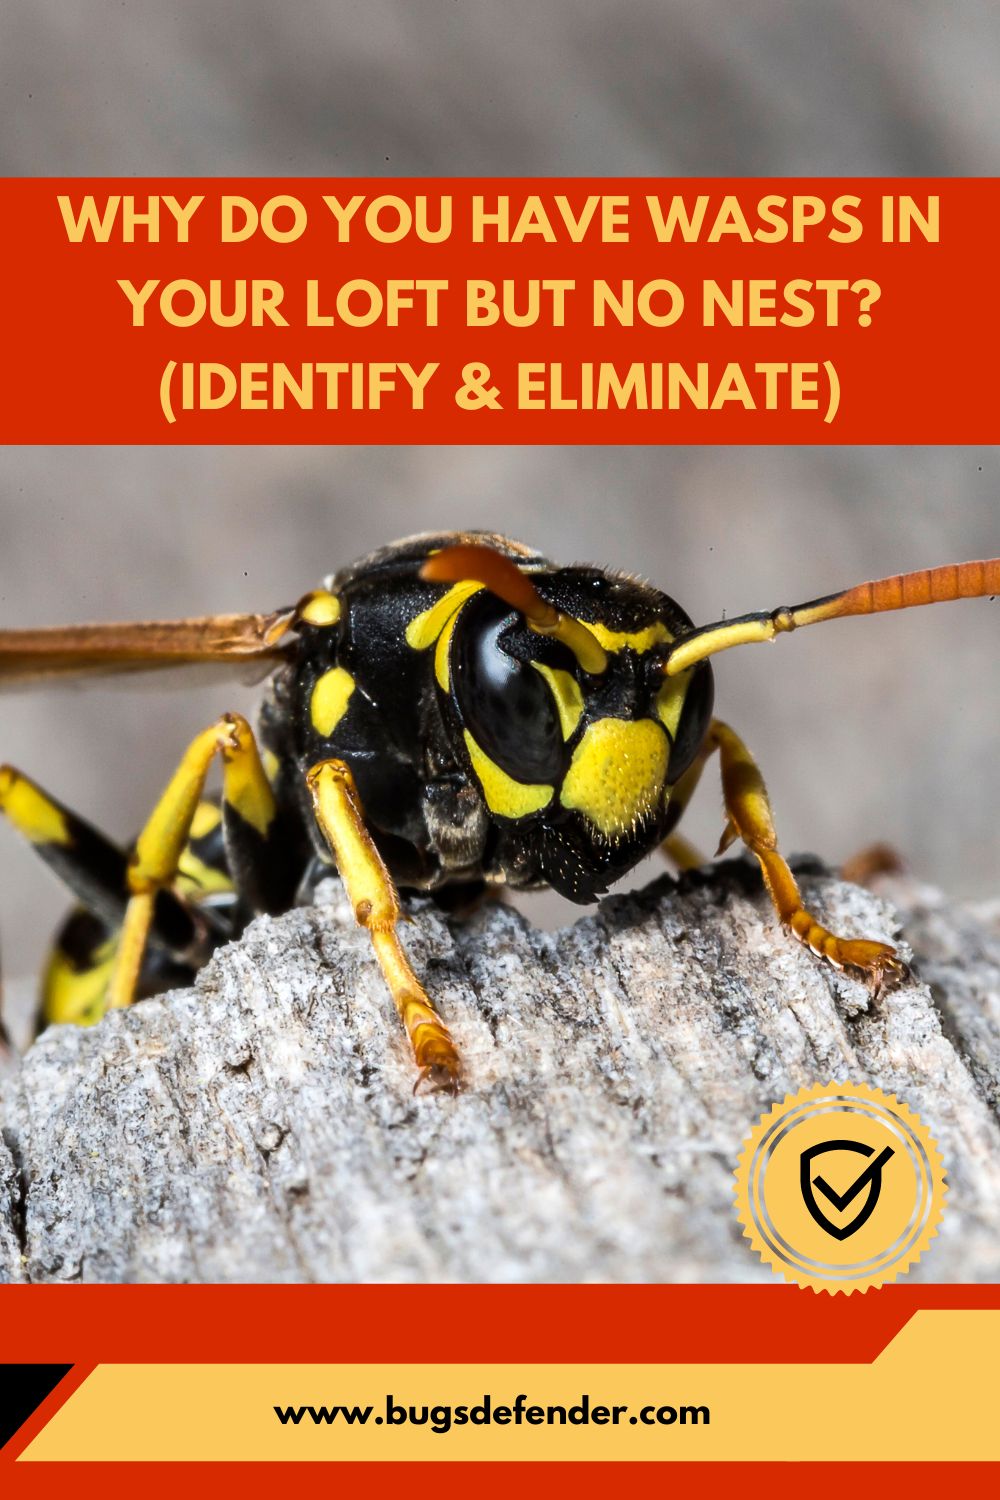 Why Do You Have Wasps in Your Loft but No Nest pin1